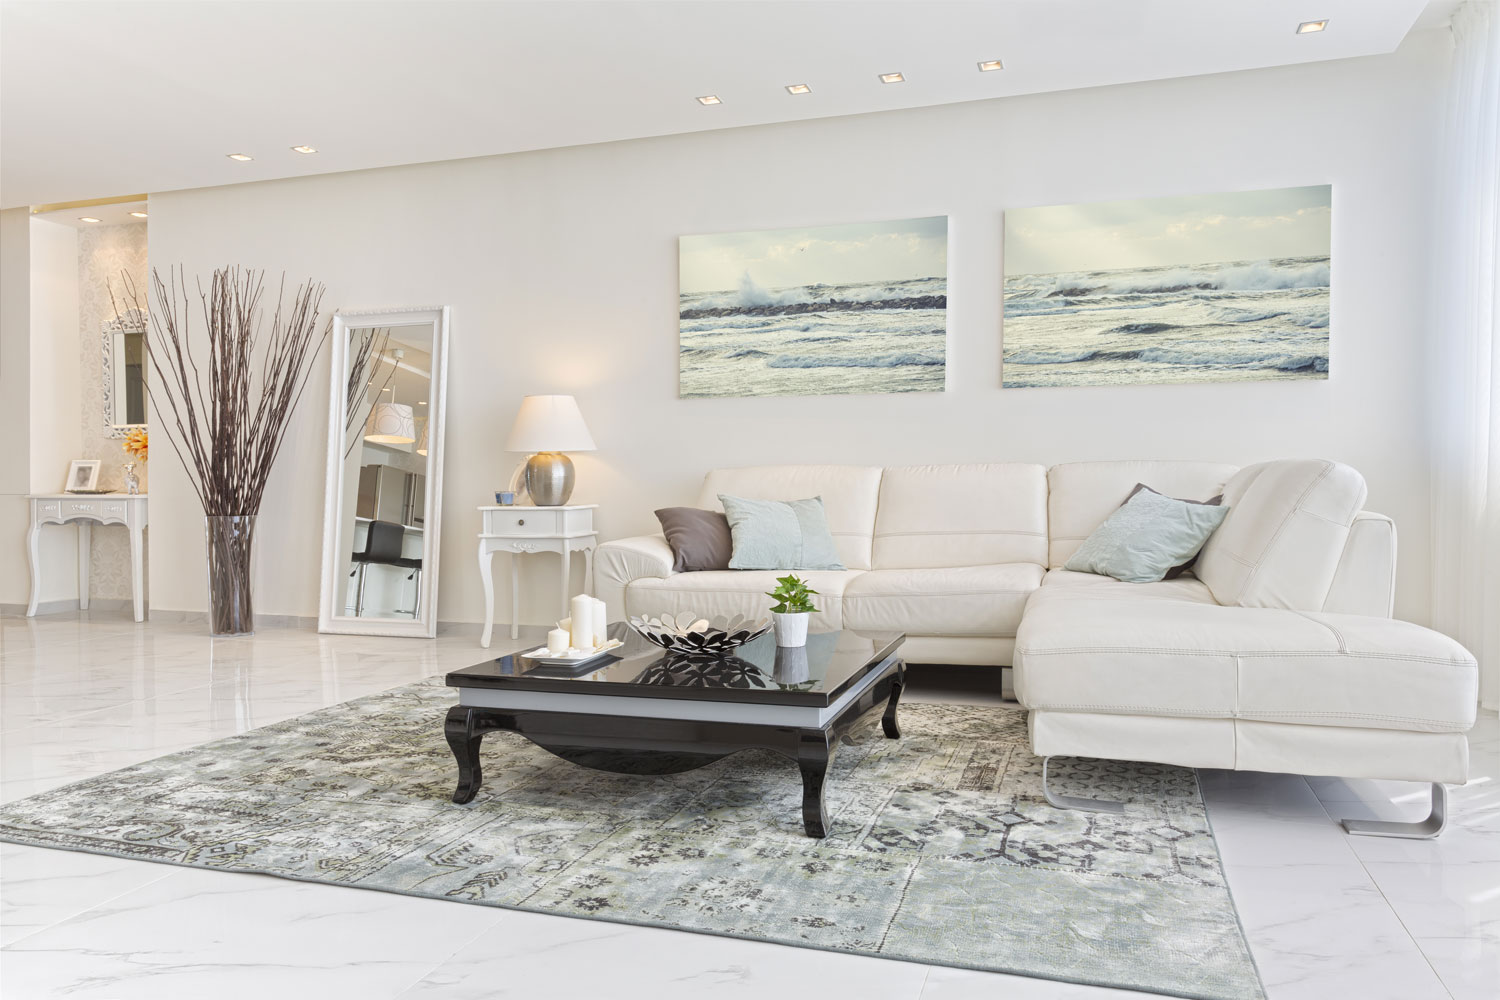 A white sectional sofa inside a modern white living room with gray abstract carpet